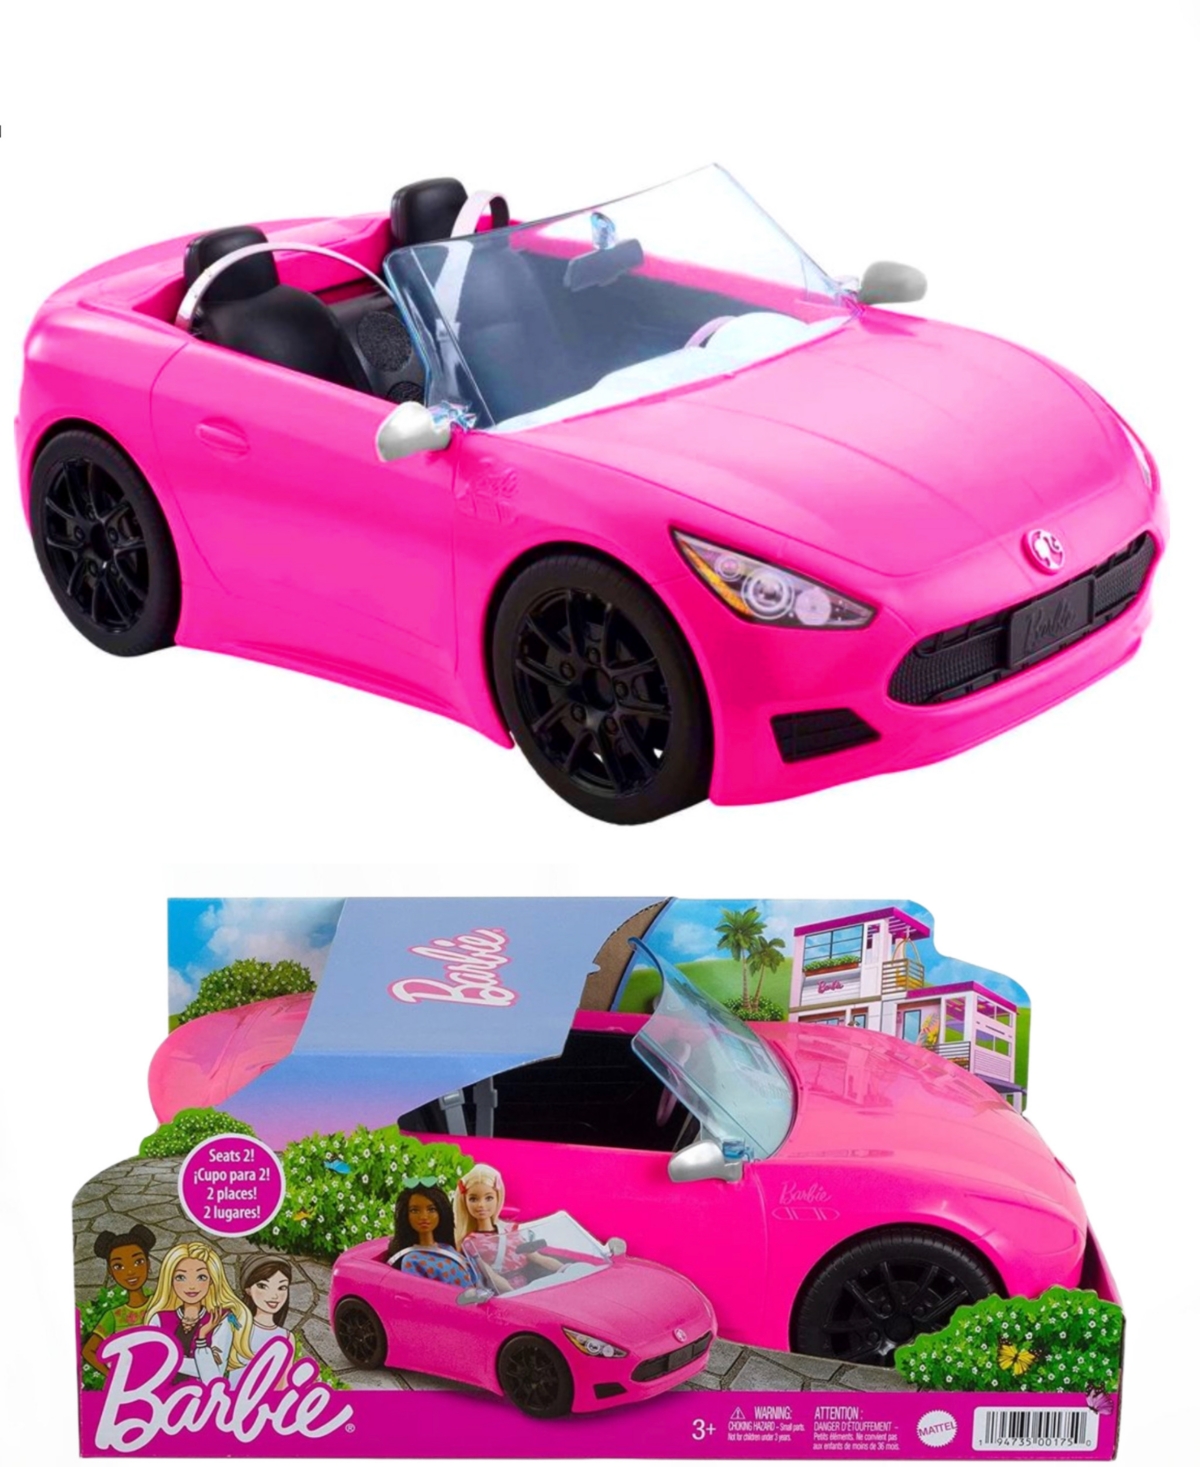 Barbie Kids' Convertible 2-seater Pink Passenger Vehicle In Multi Colored